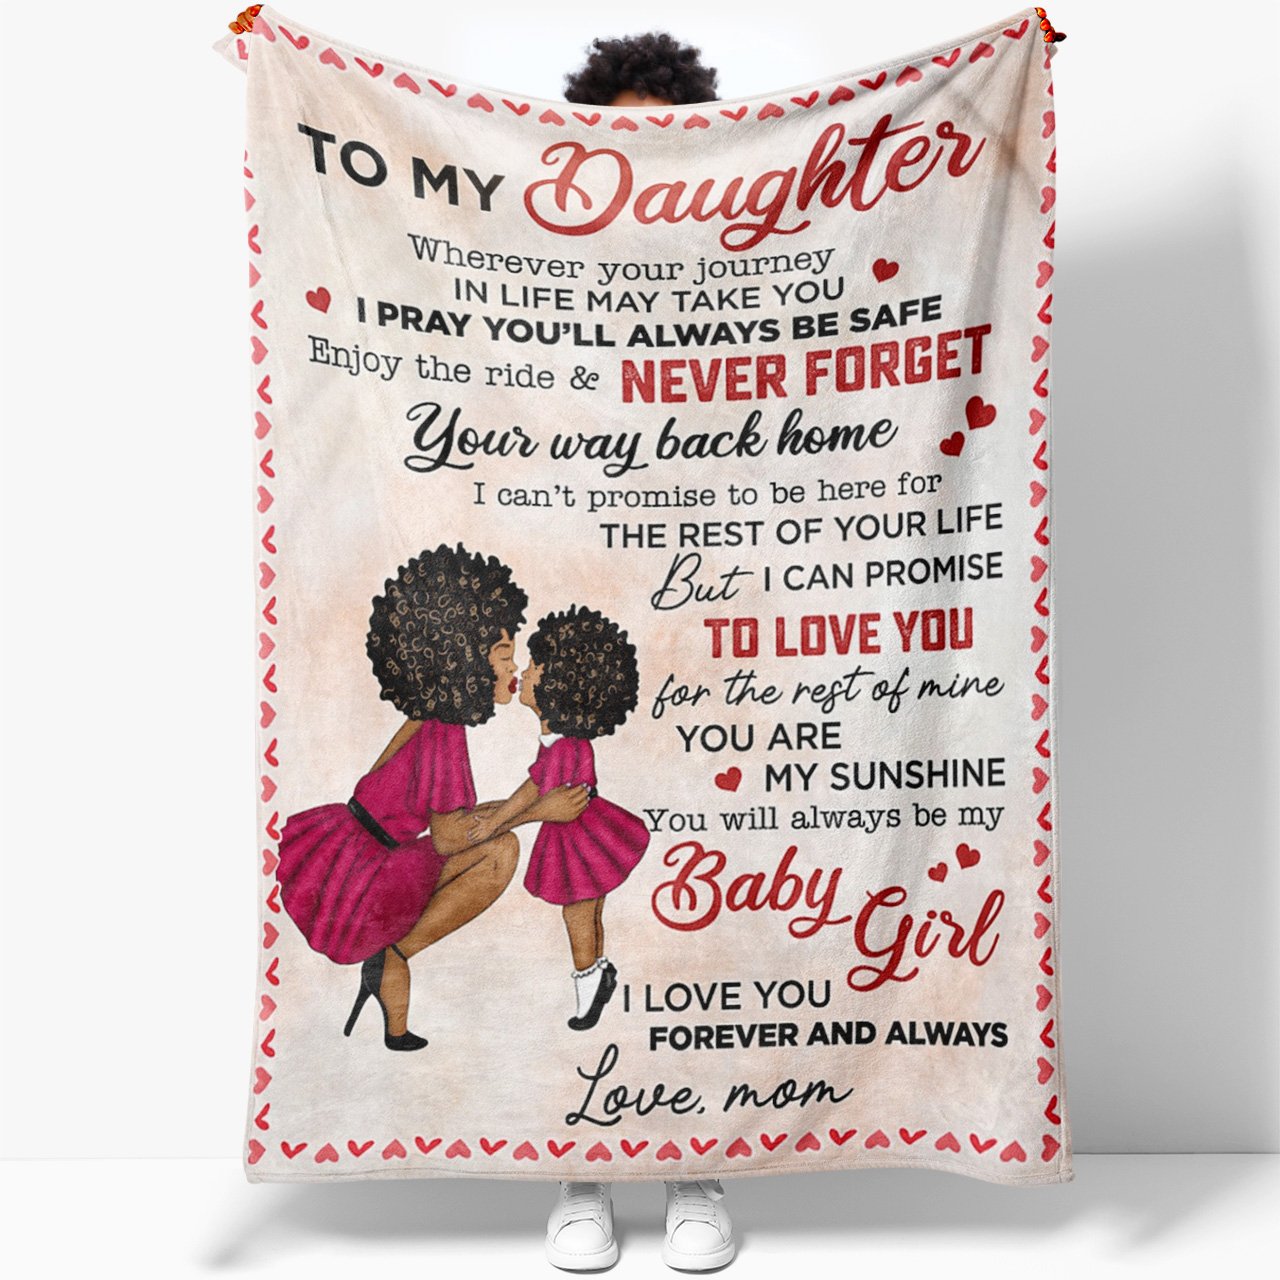 Afro African American Mom and Daughter Blanket, Never Forget Your Way Back Home Blanket, I Love You Forever and Always Blanket, Personalized Gifts